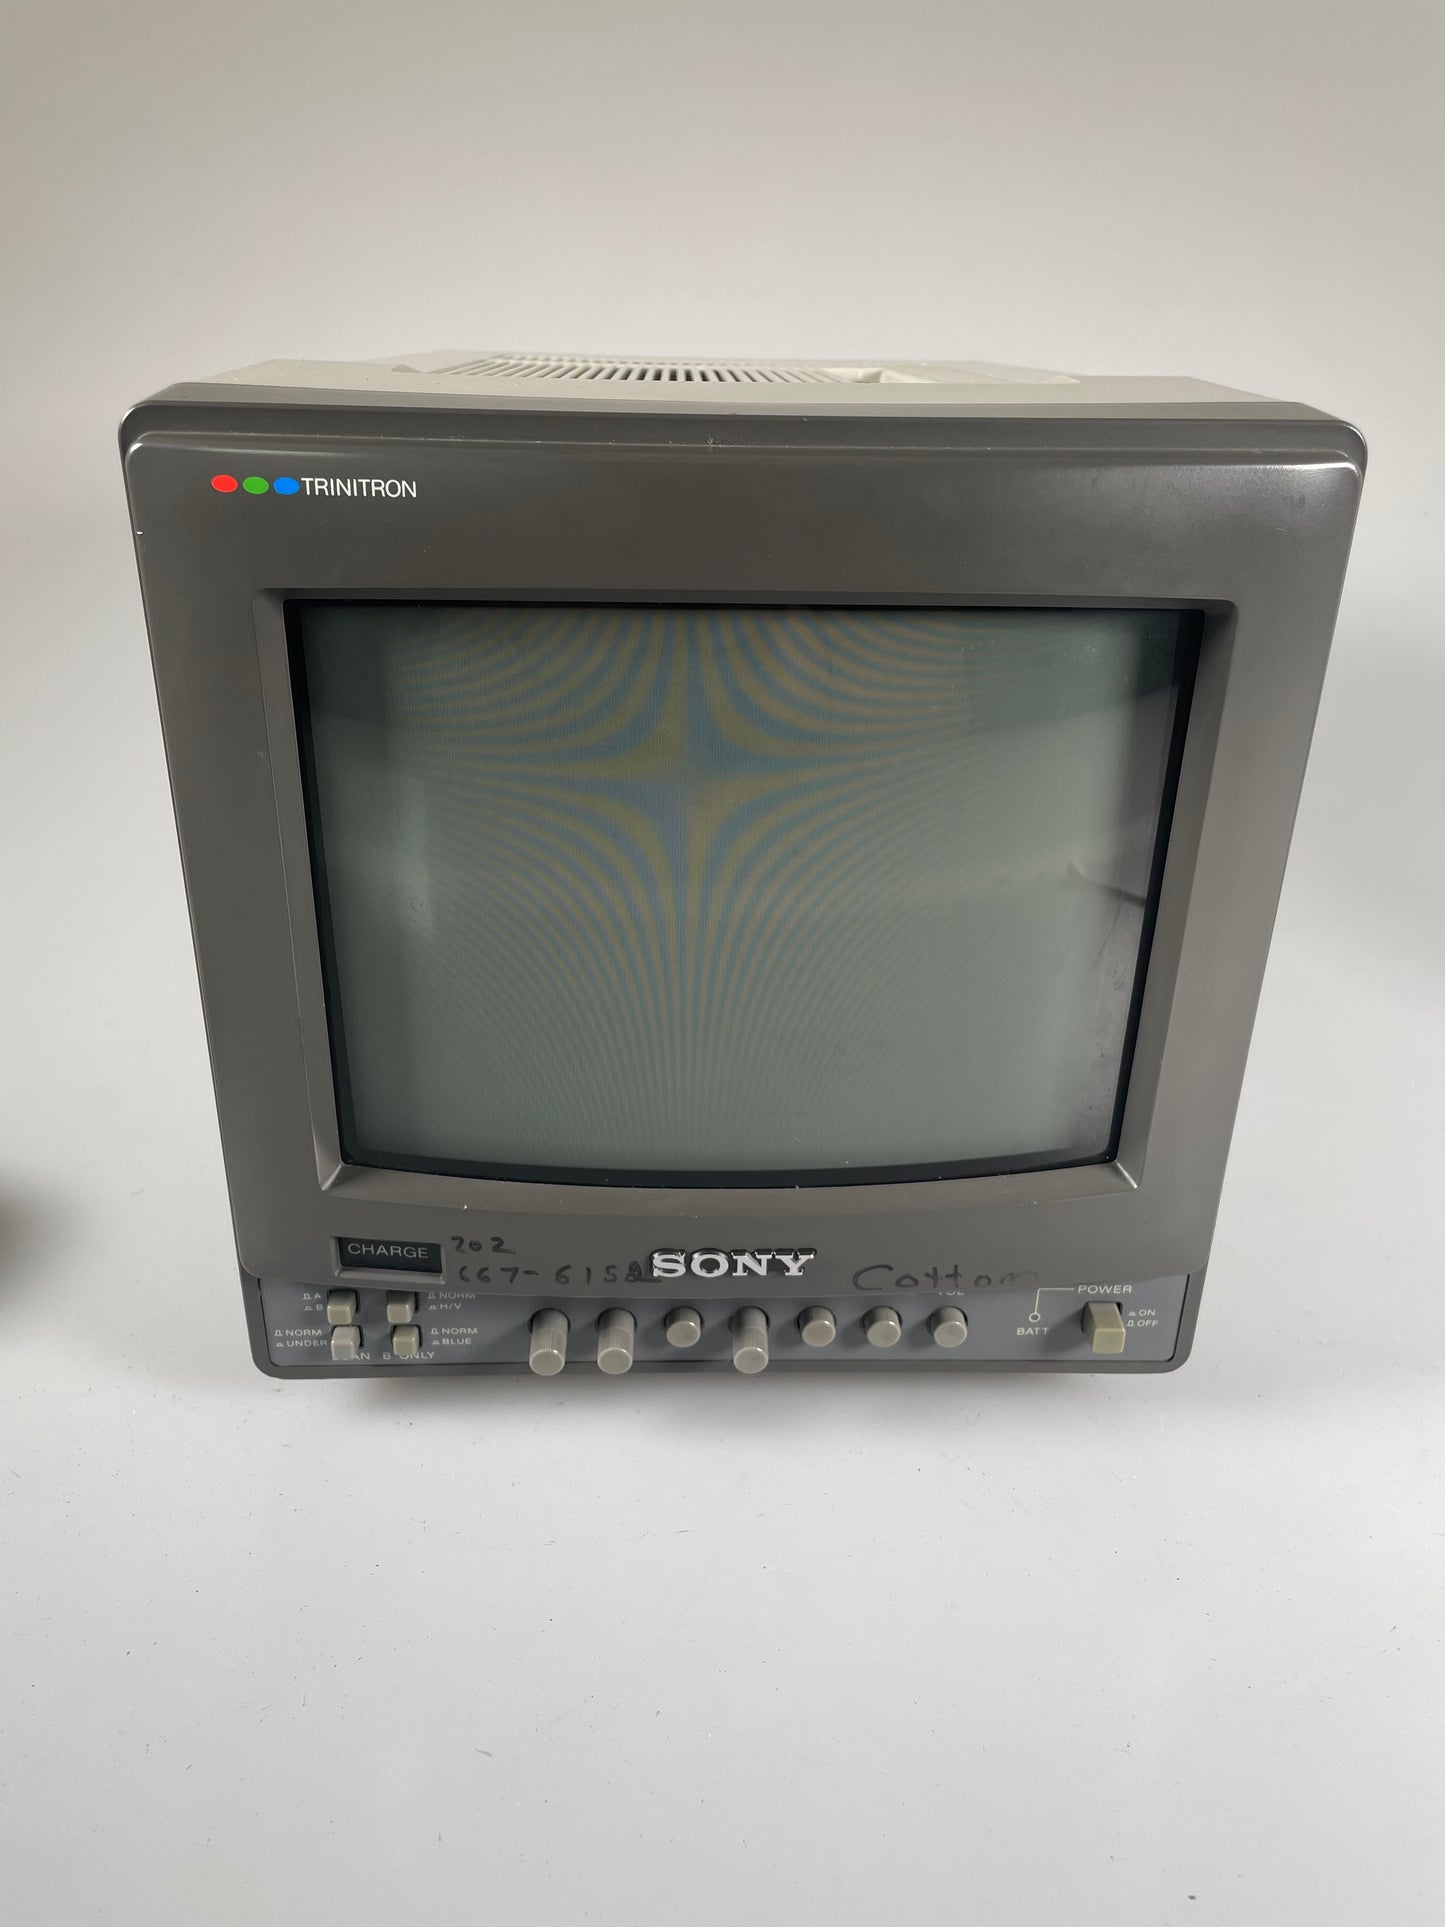 Sony PVM-8020 8" Trinitron Video Monitor w/ charger and 4 batteries